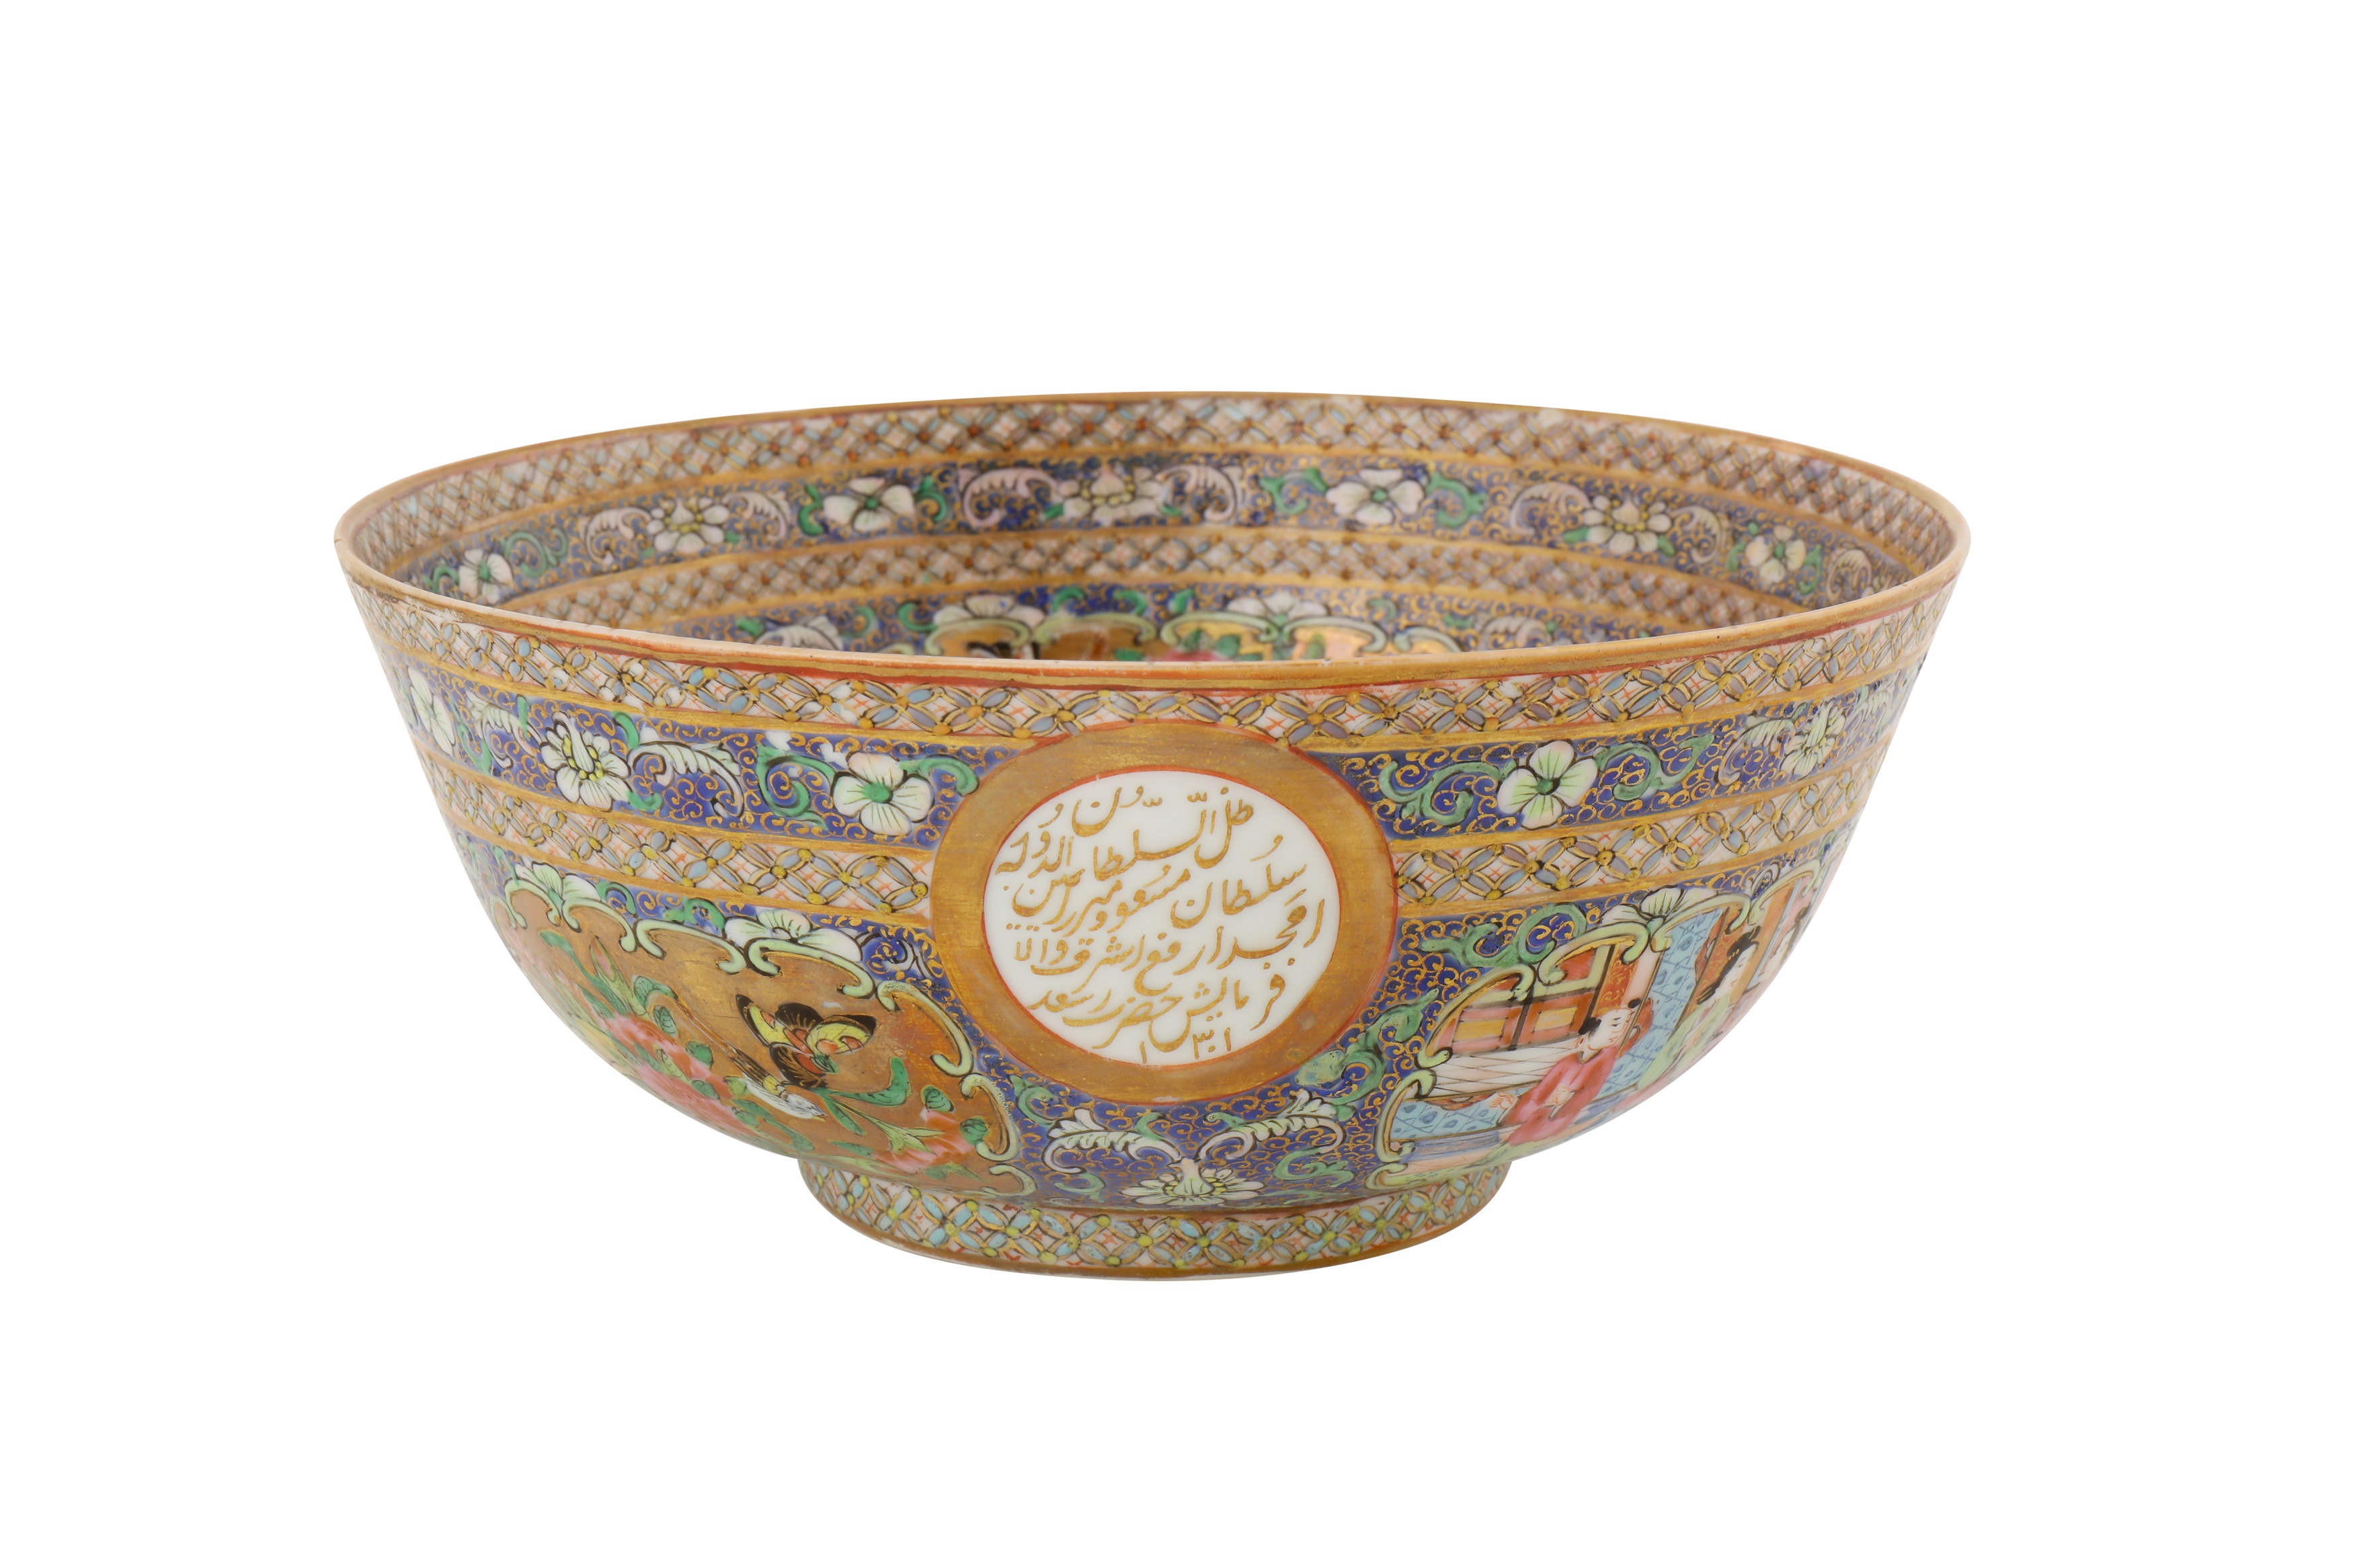 A MEDIUM-SIZED BOWL AND DISH AND SMALLER BOWL FROM THE ZILL AL-SULTAN CANTON PORCELAIN SERVICE - Image 11 of 17